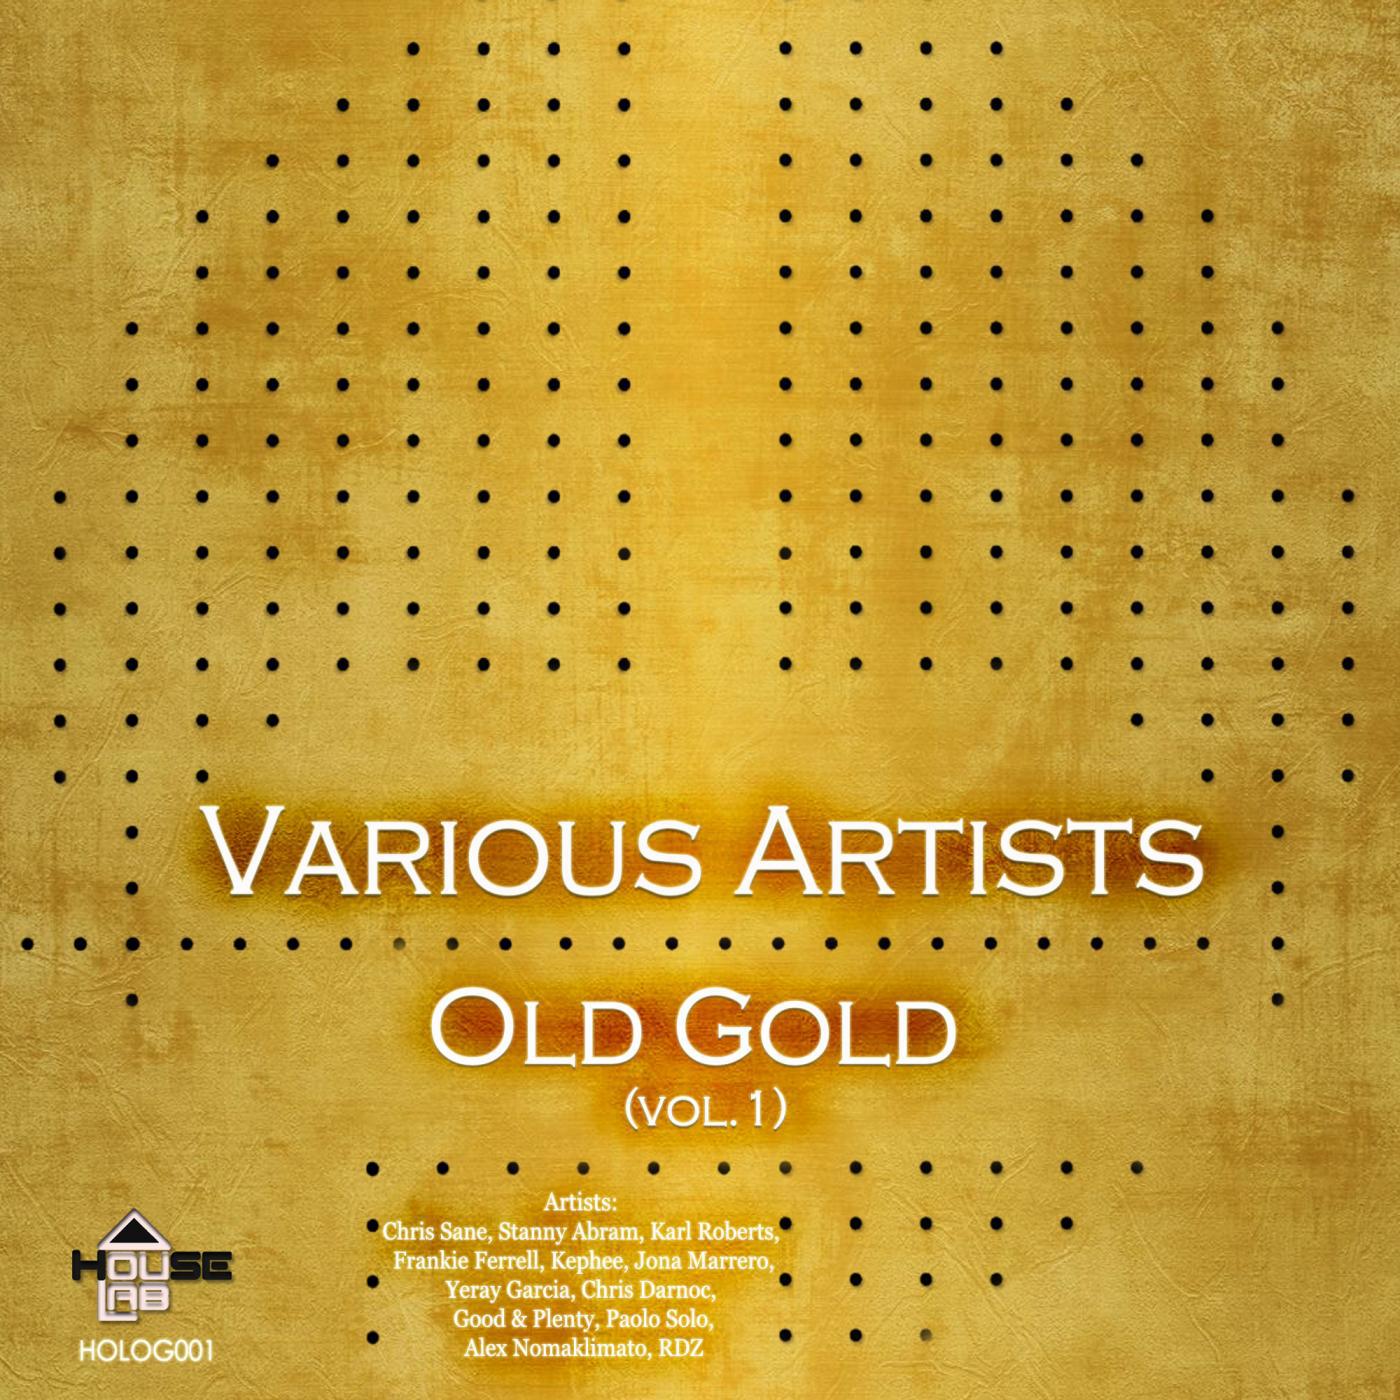 Old Gold (vol.1)